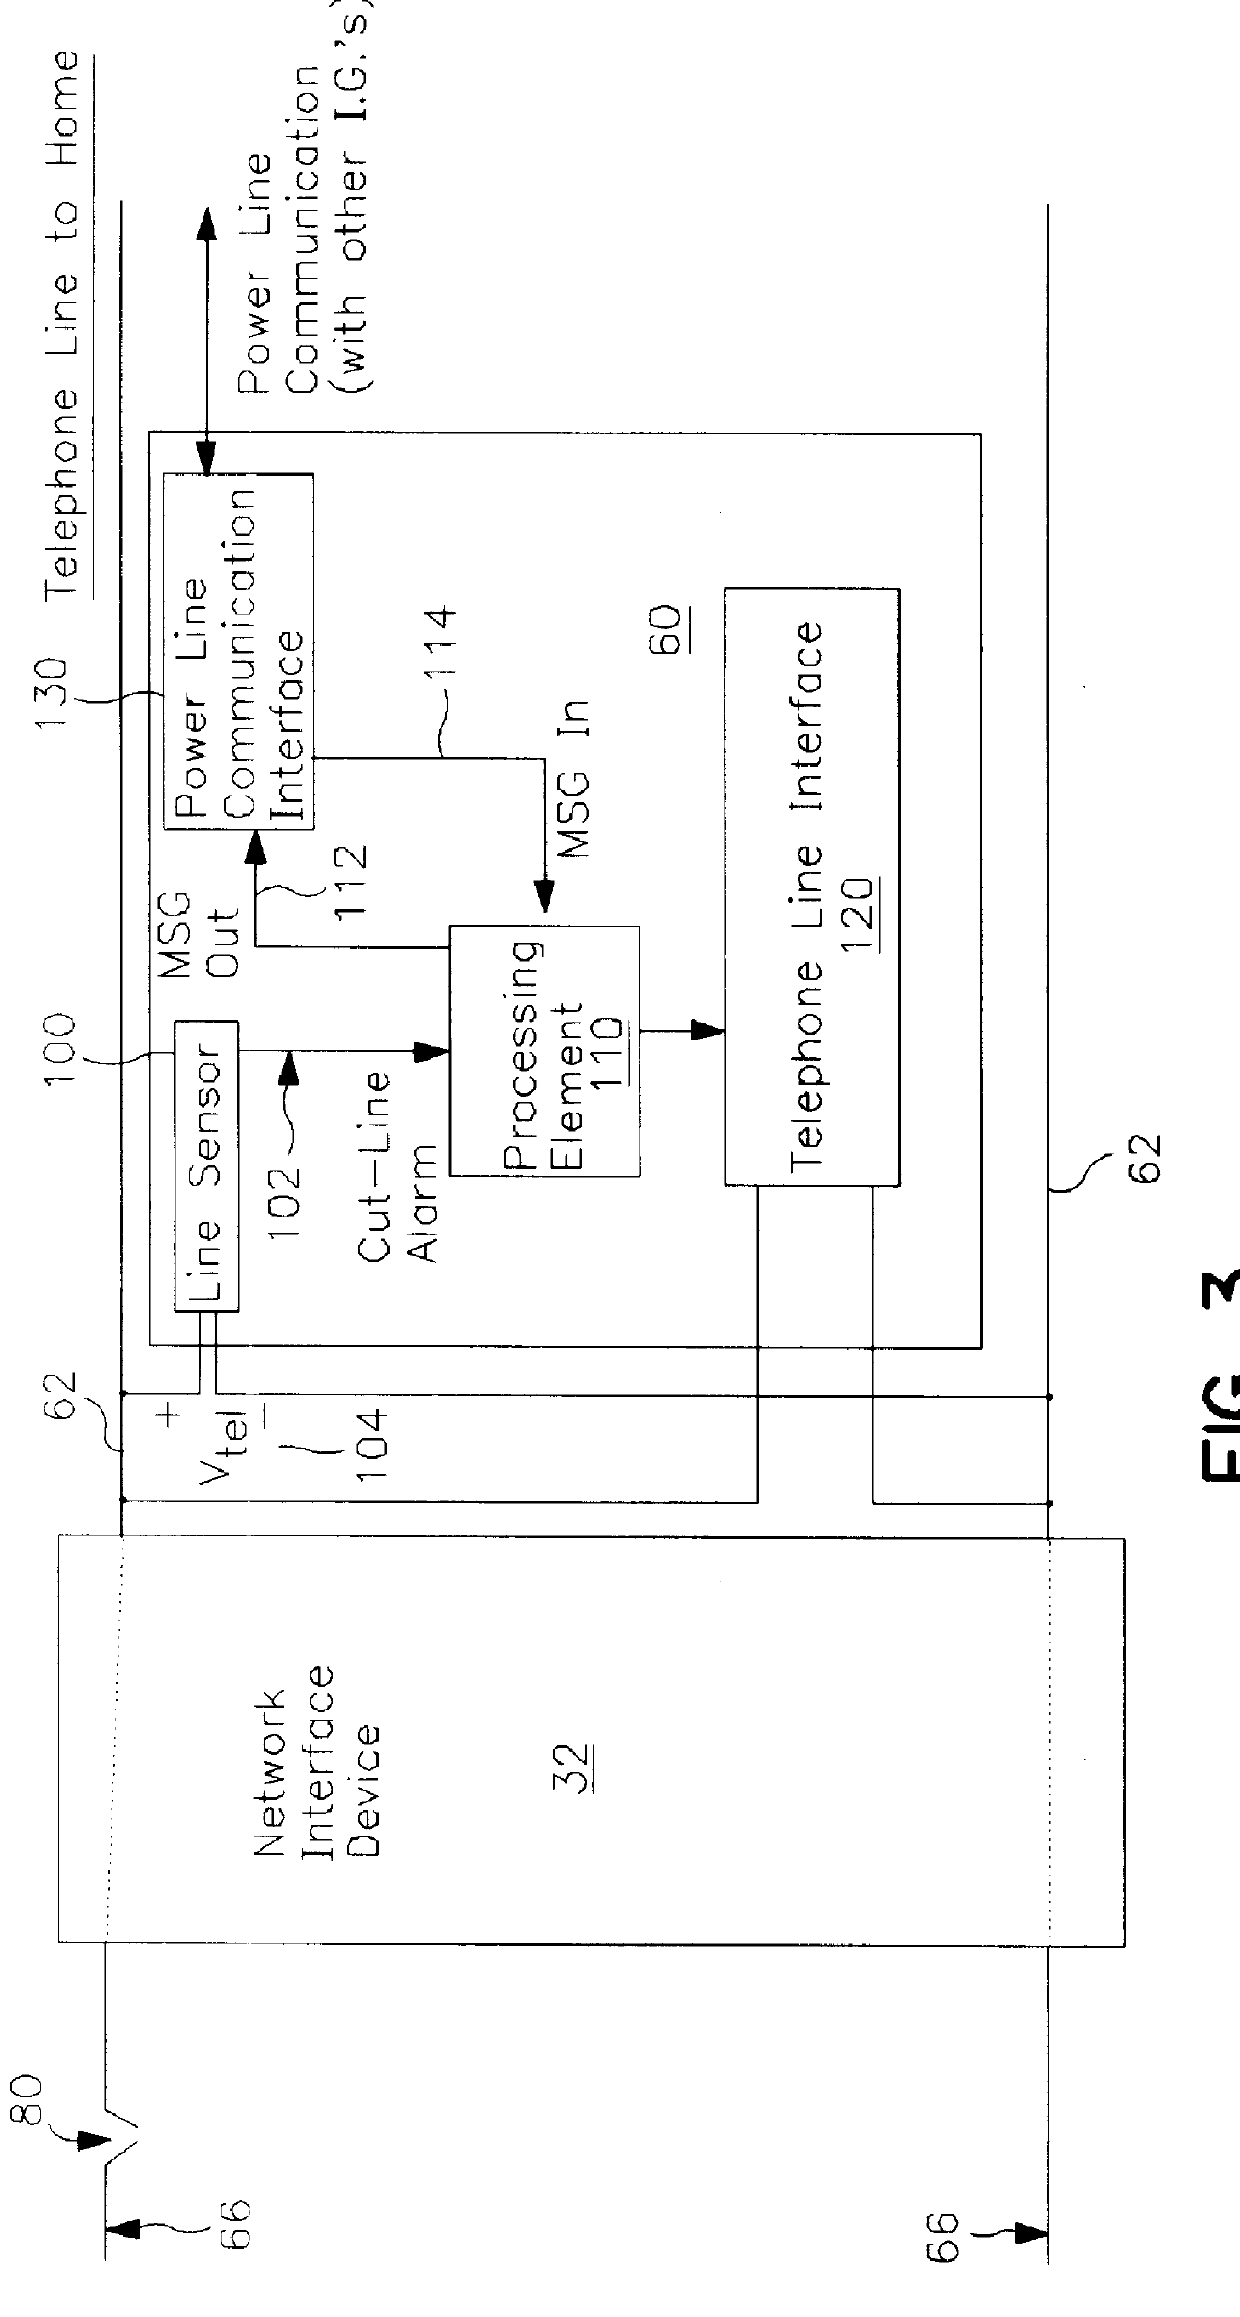 Method and apparatus for detecting and reporting a defective telecommunications line